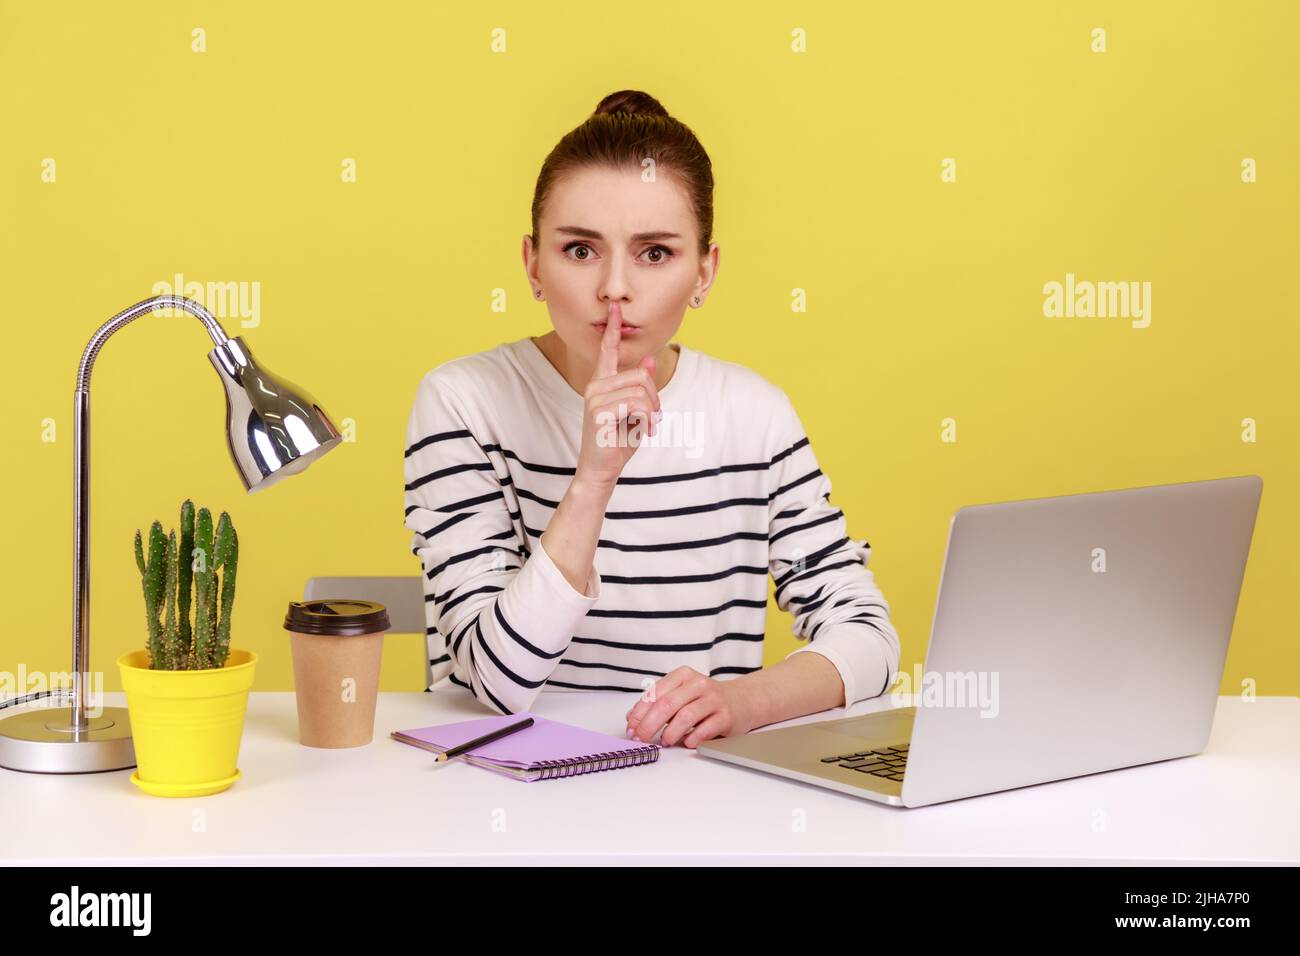 Be quiet. Serious woman in striped shirt sitting at workplace showing silence sign, looking at camera with finger on lips, asking to be silence. Indoor studio studio shot isolated on yellow background Stock Photo